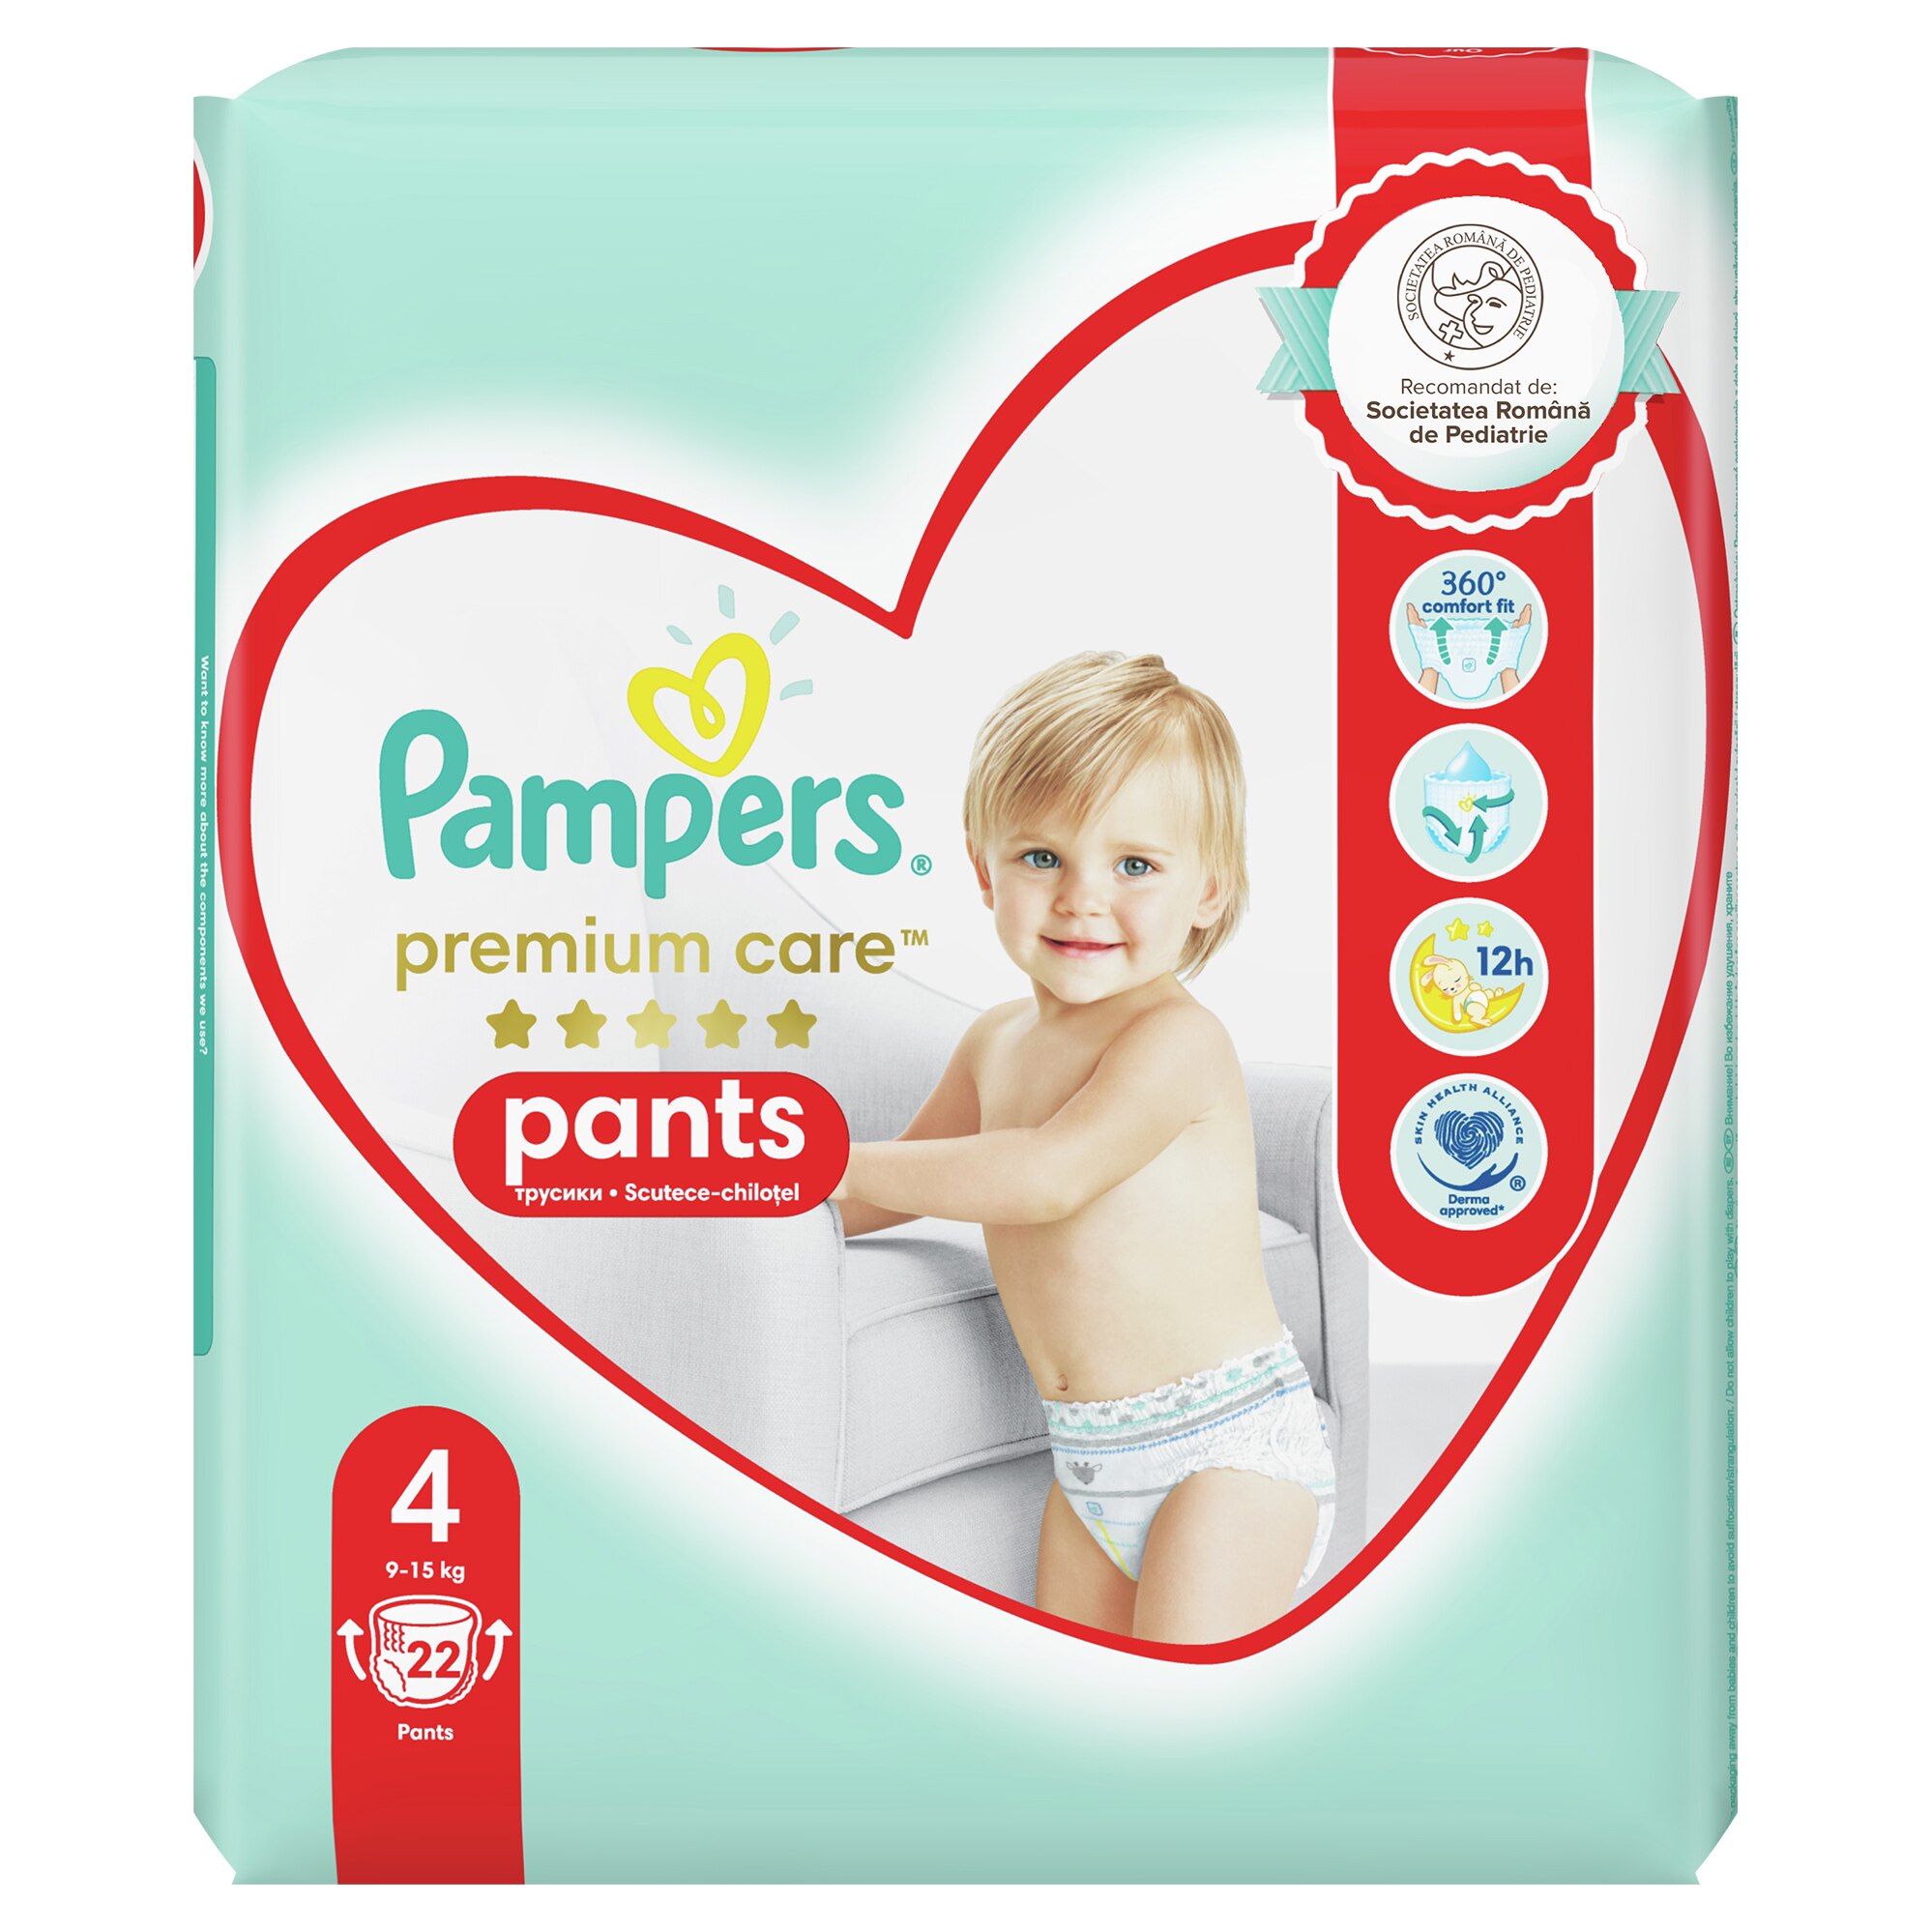 lottery school Smooth haircut alliance Disgrace emag pampers premium care nr 6 elefant -  vorbamea.ro